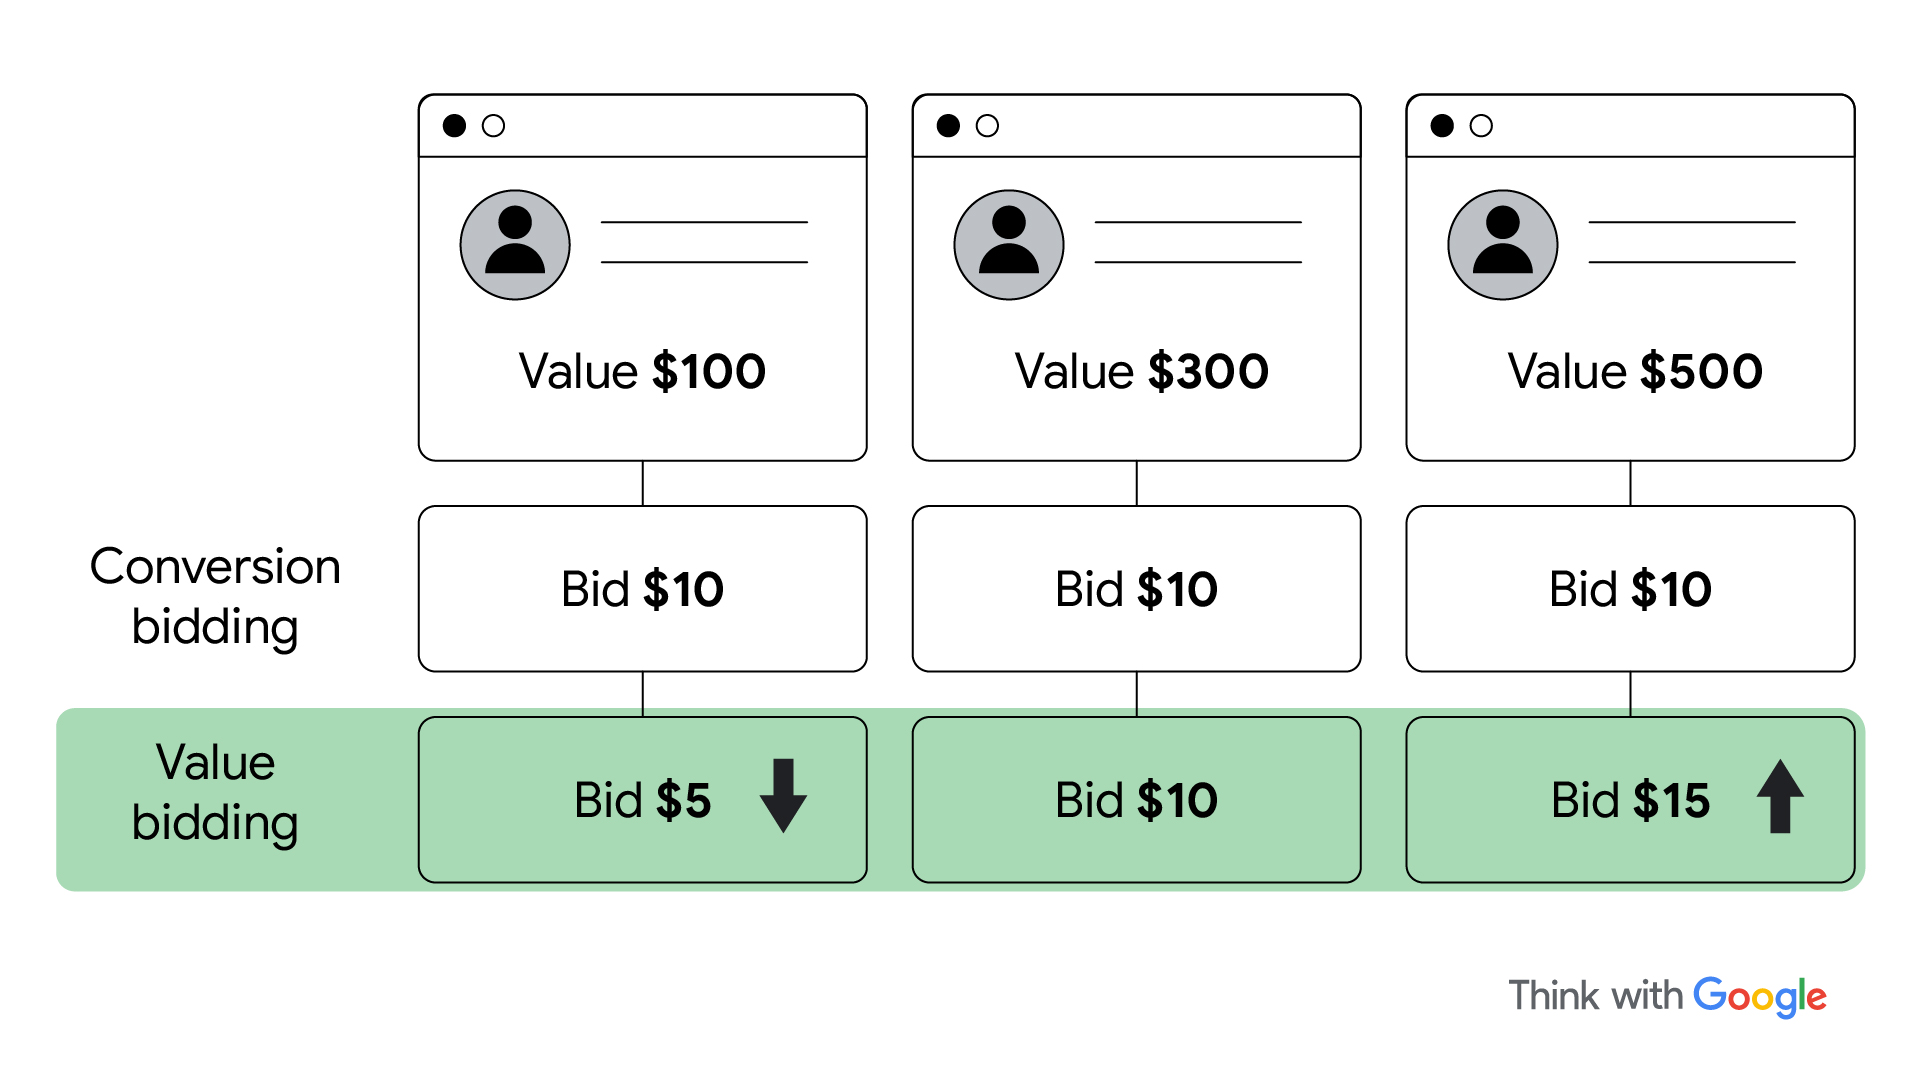 An example of value-based bidding. Three values are attributed to three different customers: $100, $300 and $500. Under conversion bidding, companies bid $10 each. Under value-based bidding, companies would bid $5, $10, and $15 respectively.